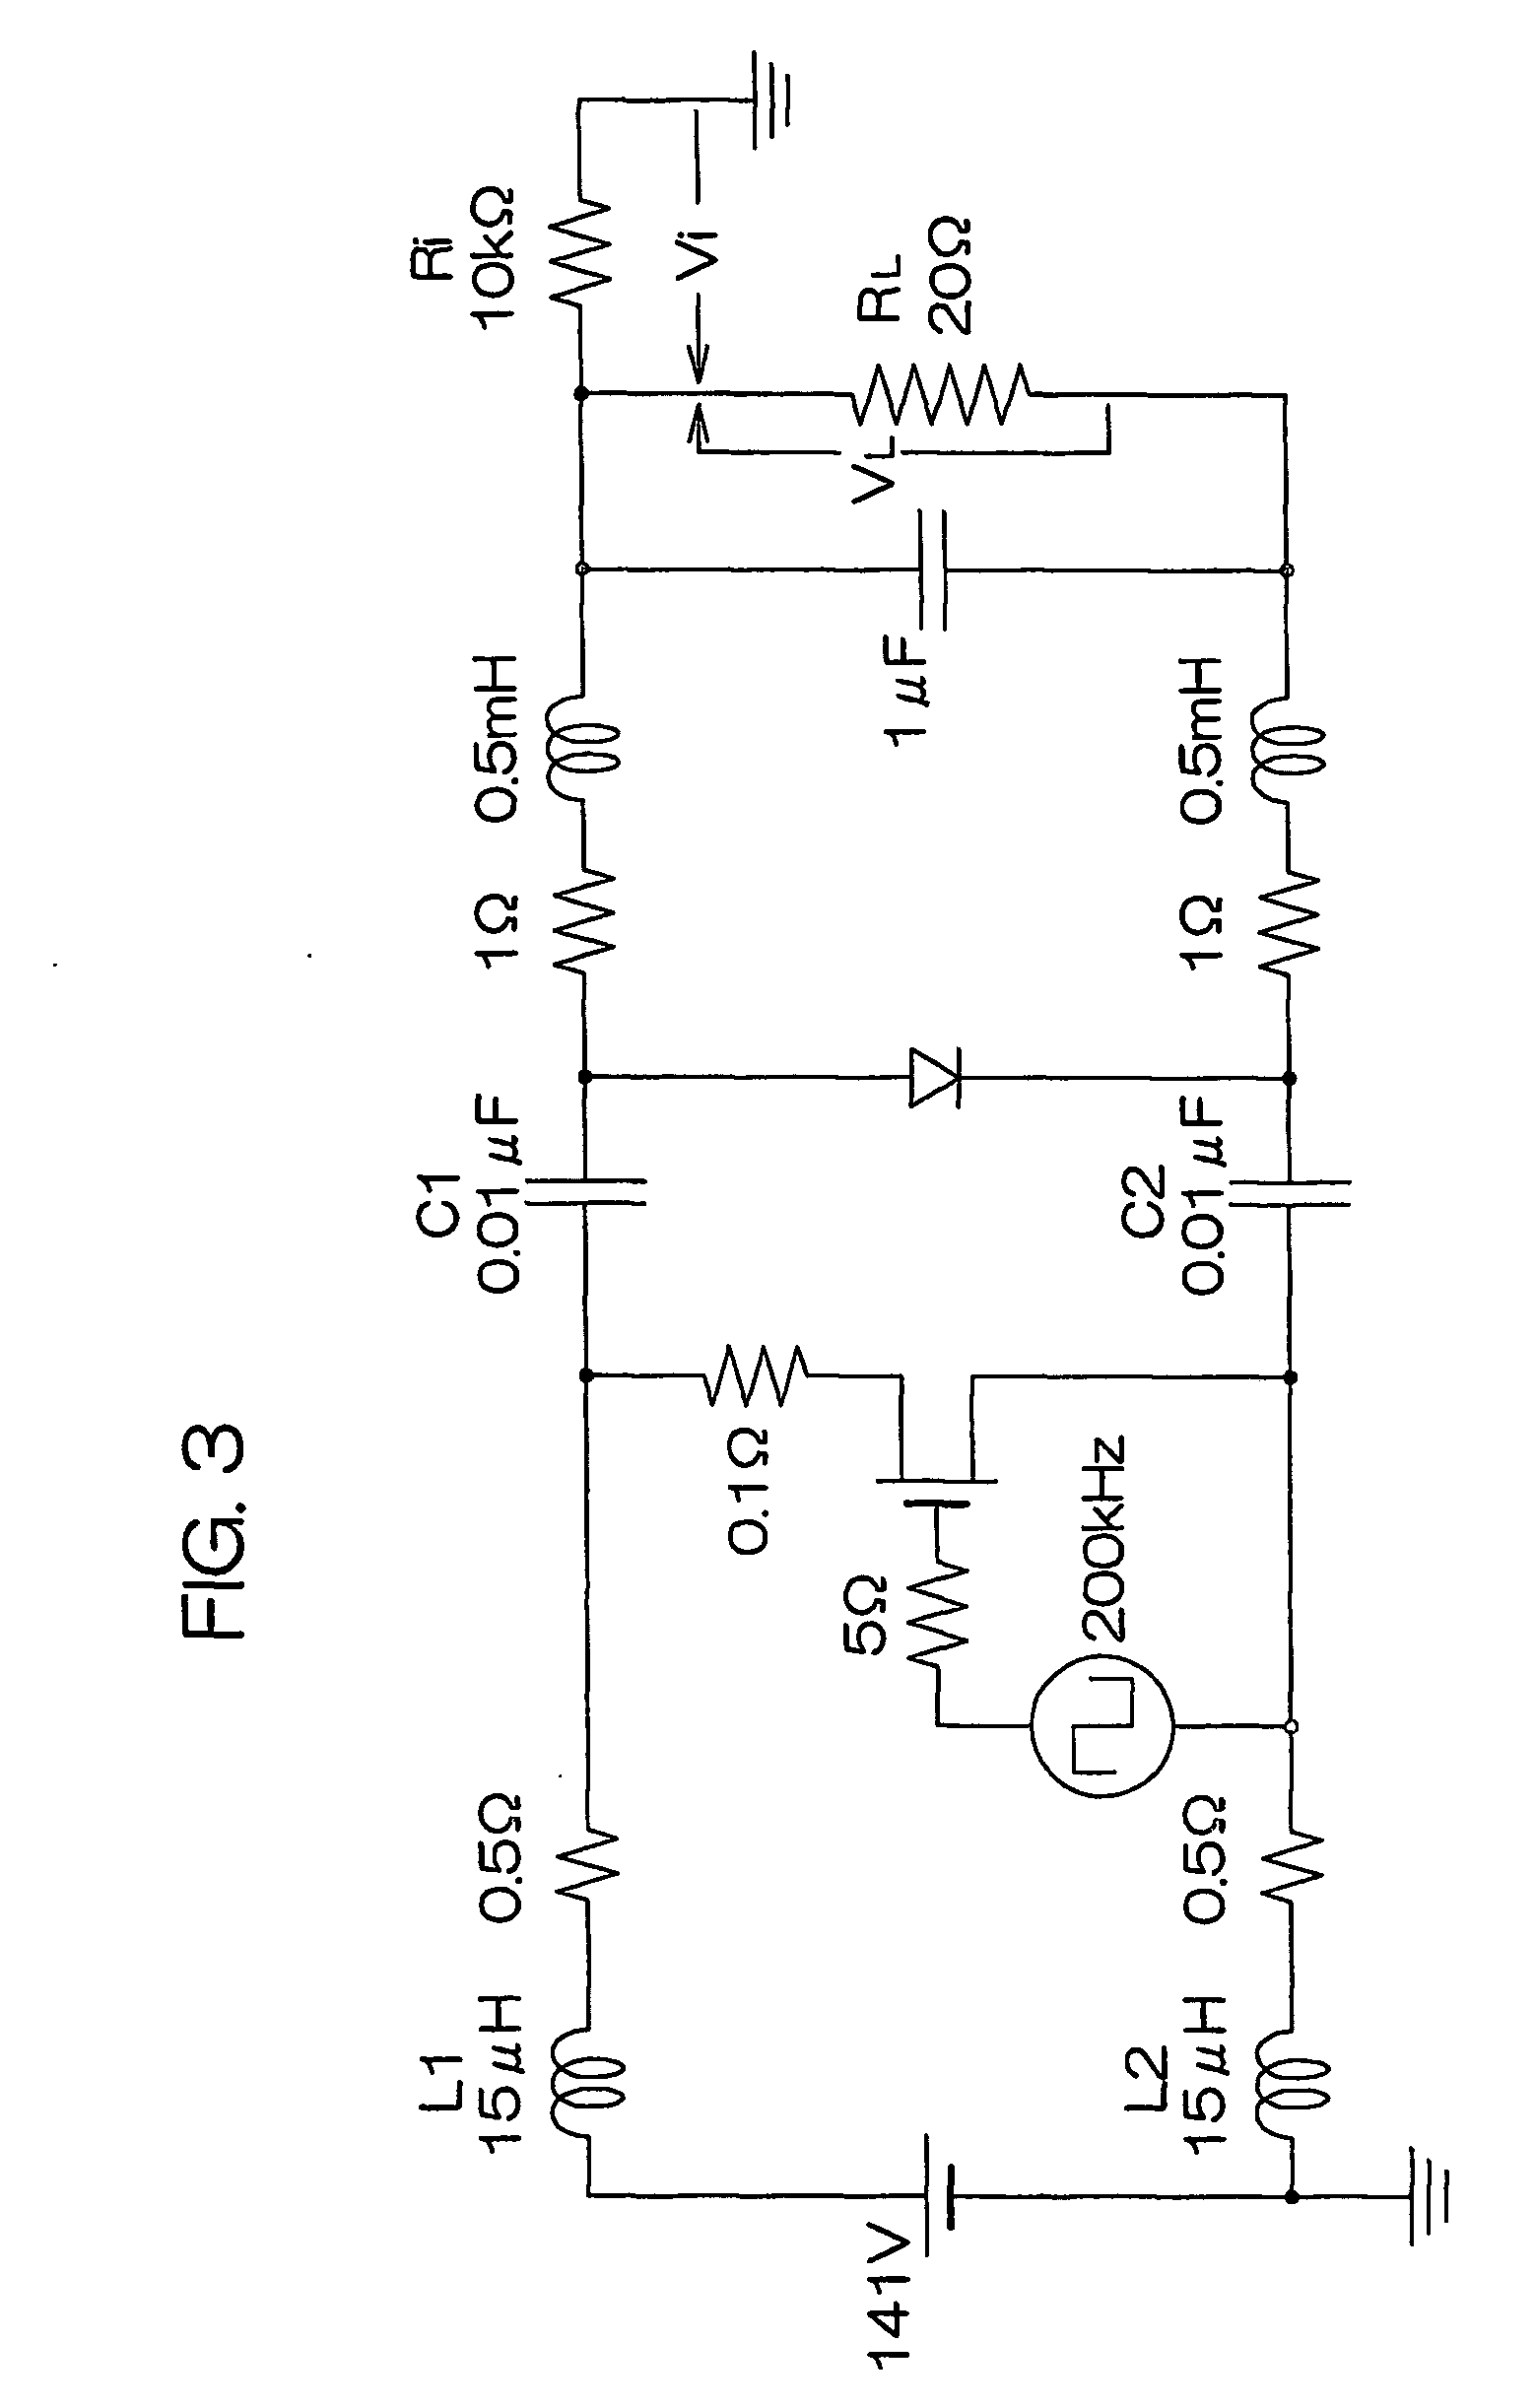 Cuk converter with inductors and capacitors on both power lines